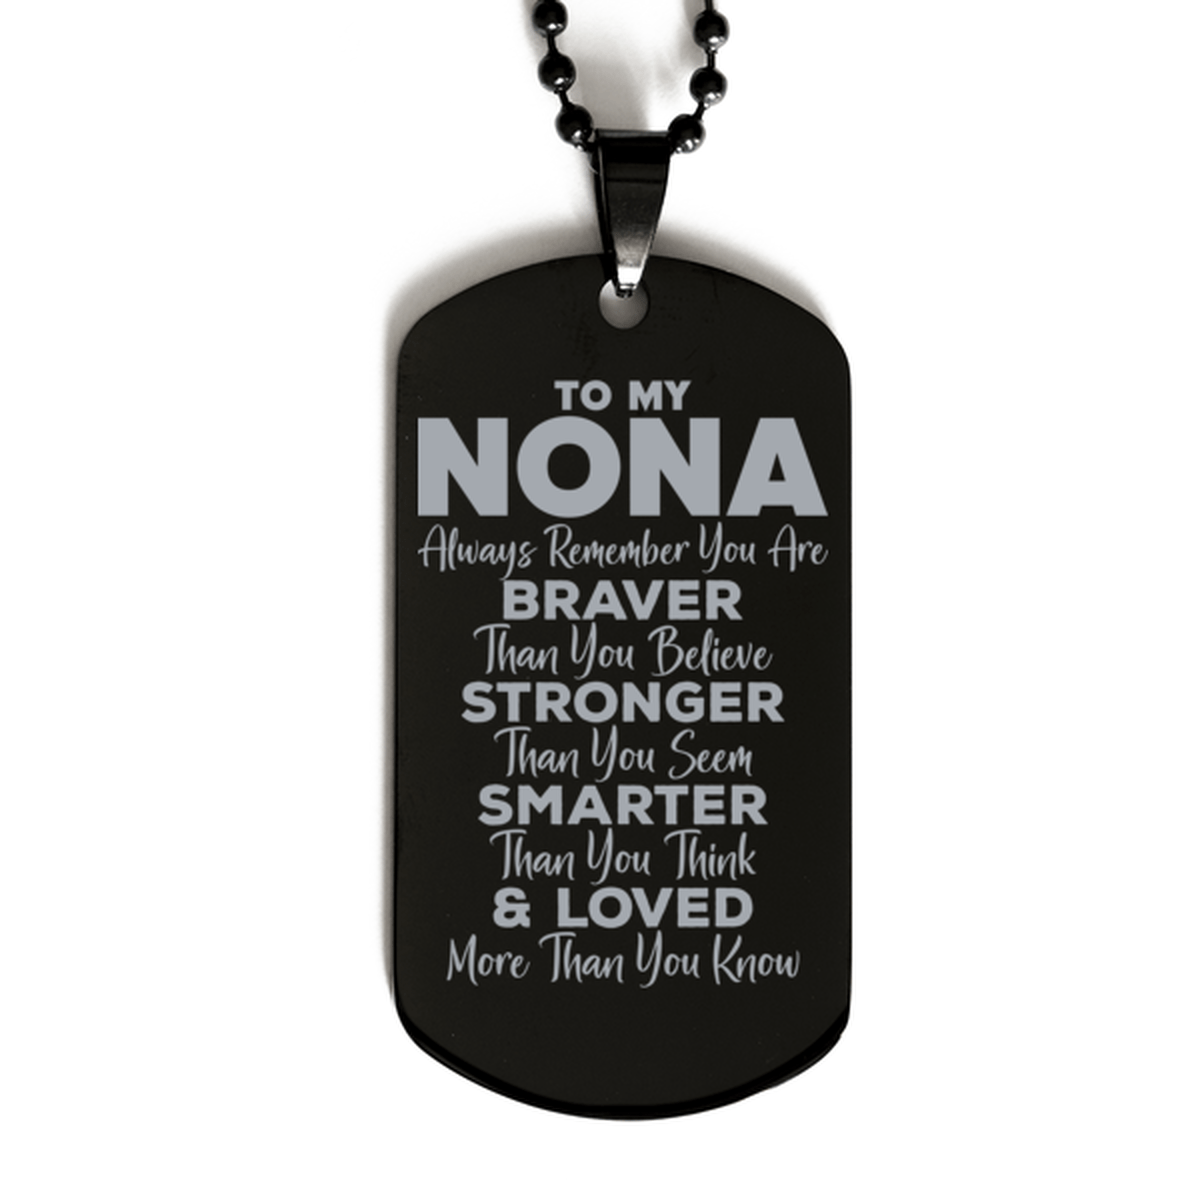 Motivational Nona Black Dog Tag Necklace, Nona Always Remember You Are Braver Than You Believe, Best Birthday Gifts for Nona